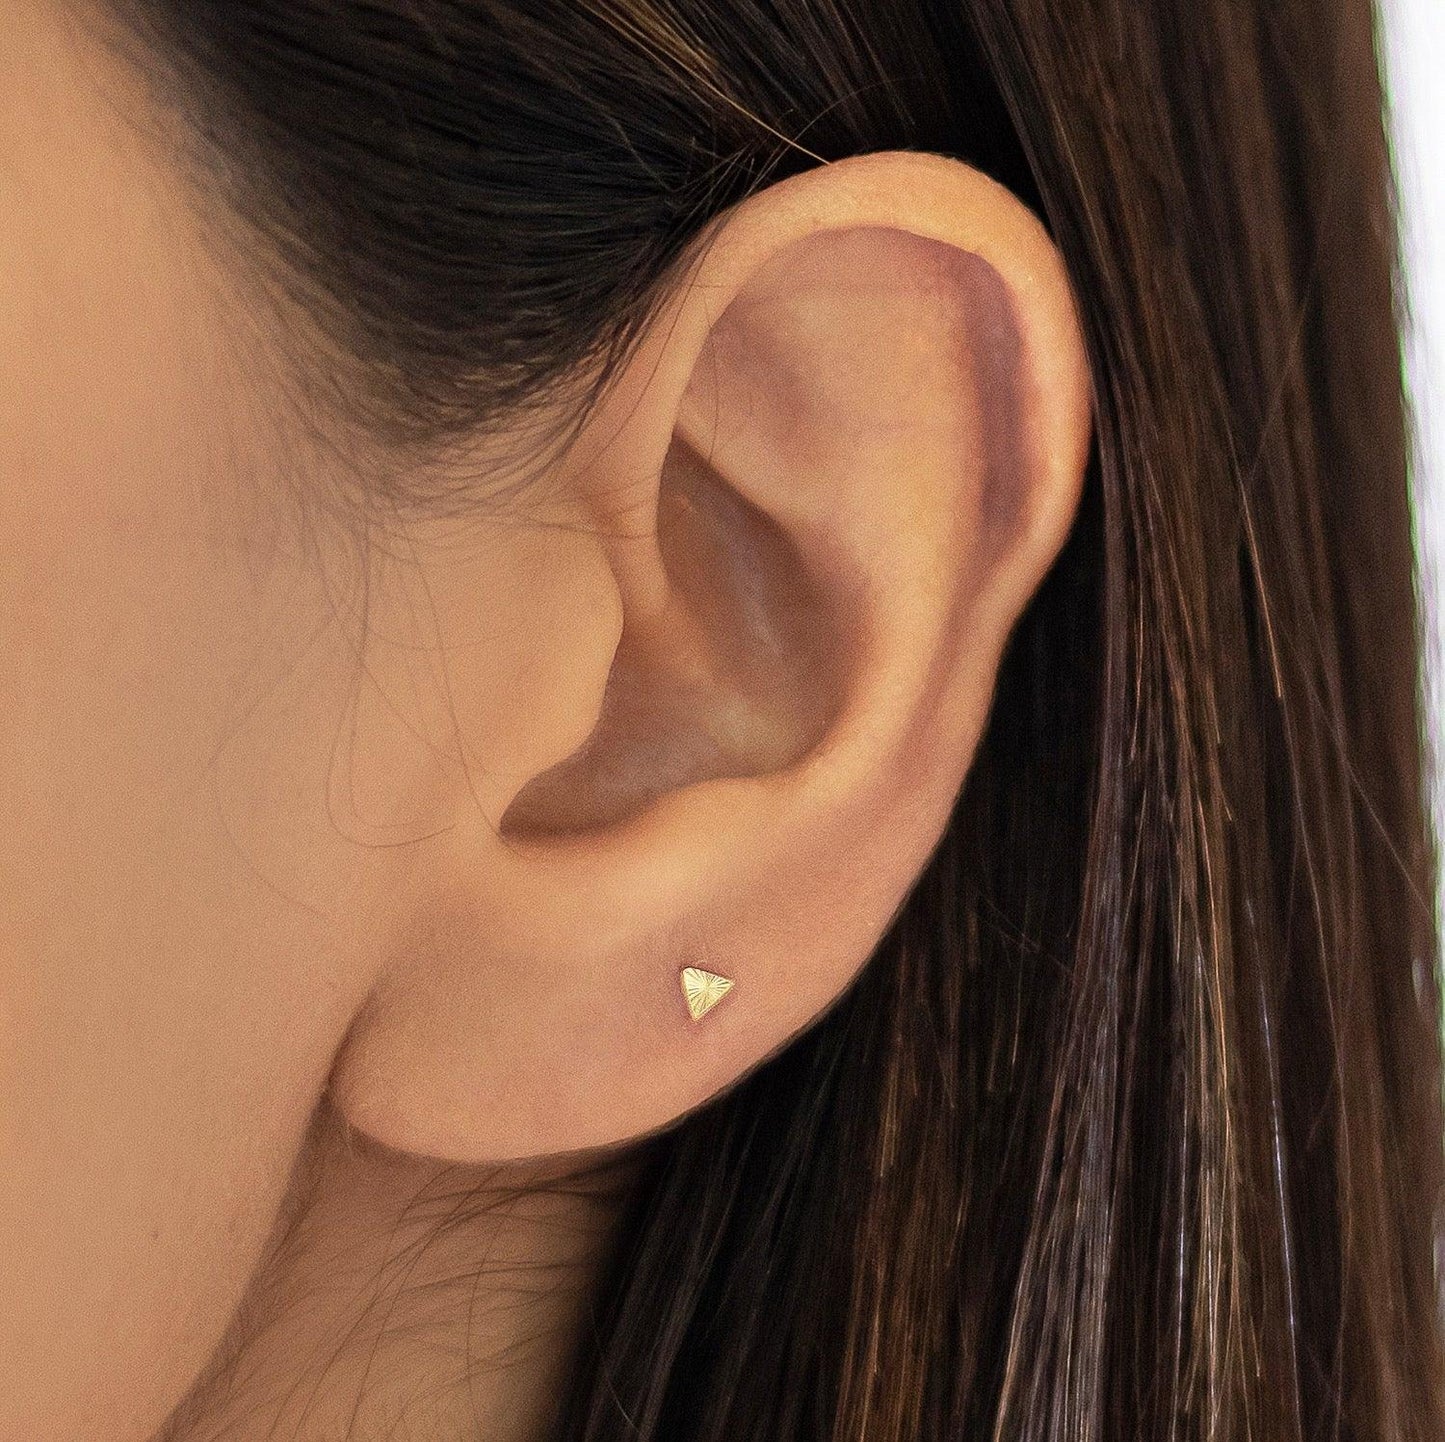 These triangle earrings are crafted from 10k gold, and feature a small triangle design. They are great for second hole piercings or cartilage piercings. You can wear them with any outfit for a clean and fresh look.